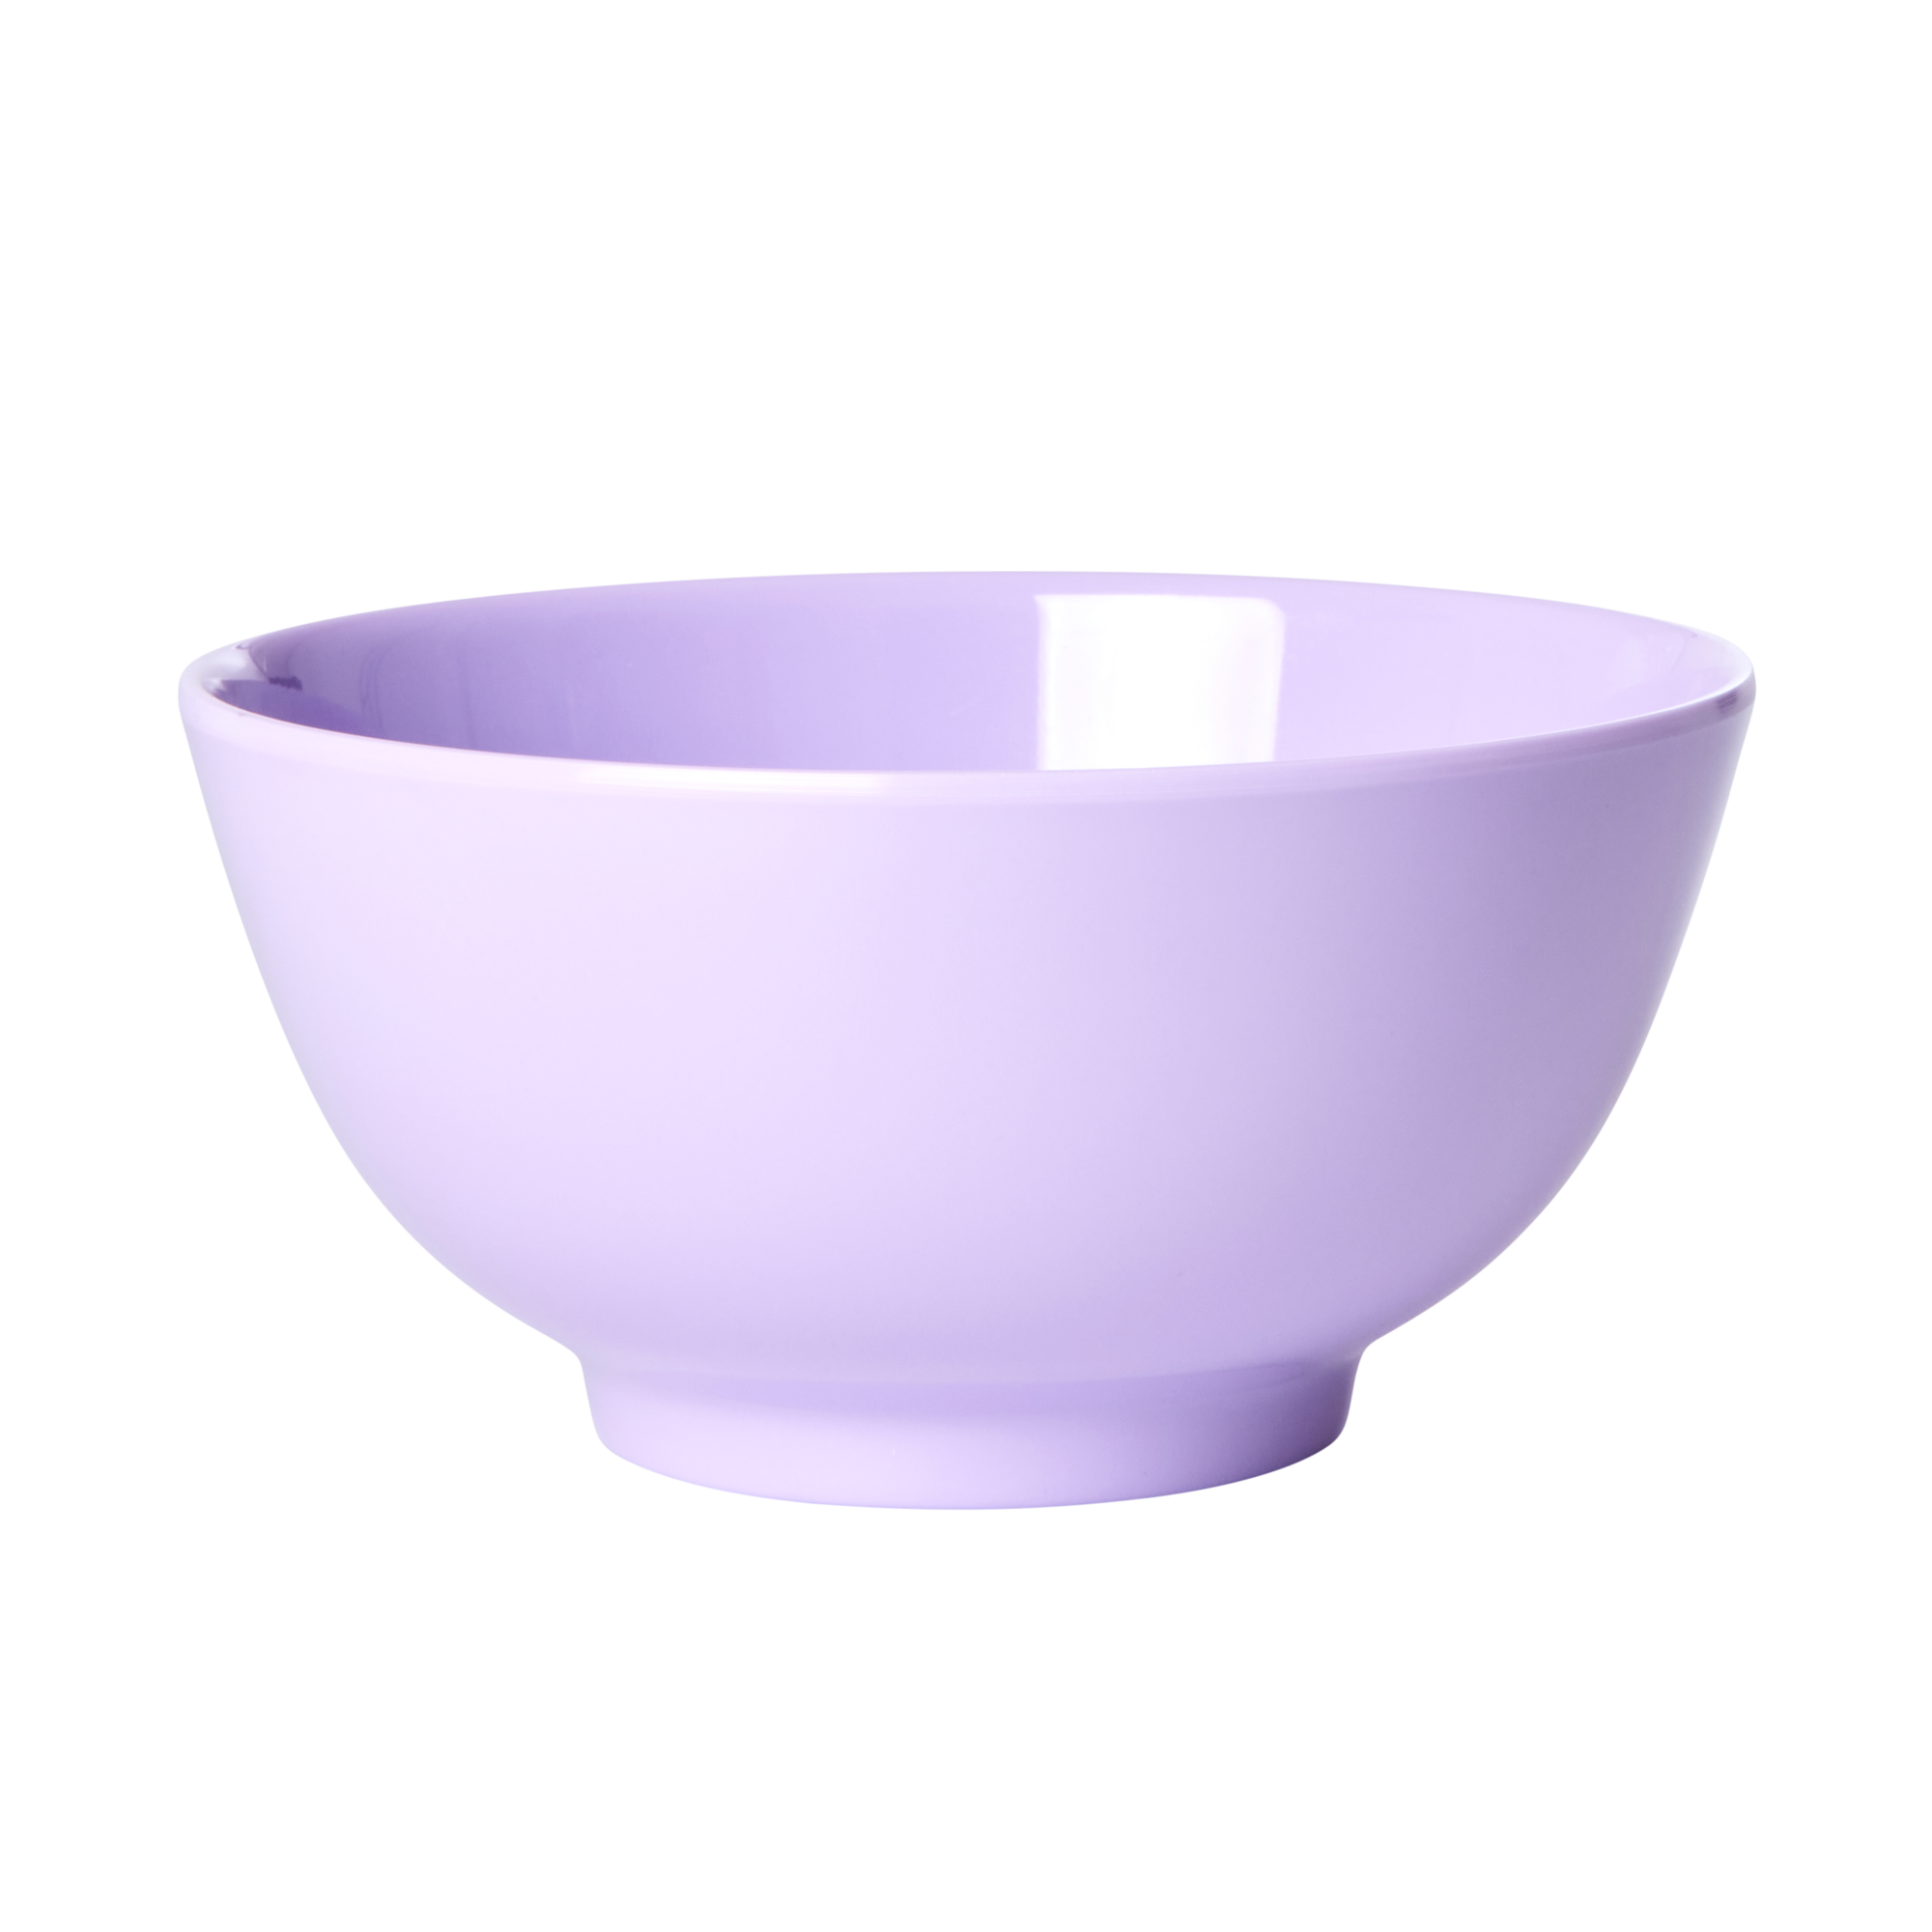 Melamine bowl by Rice by Rice in the color violet